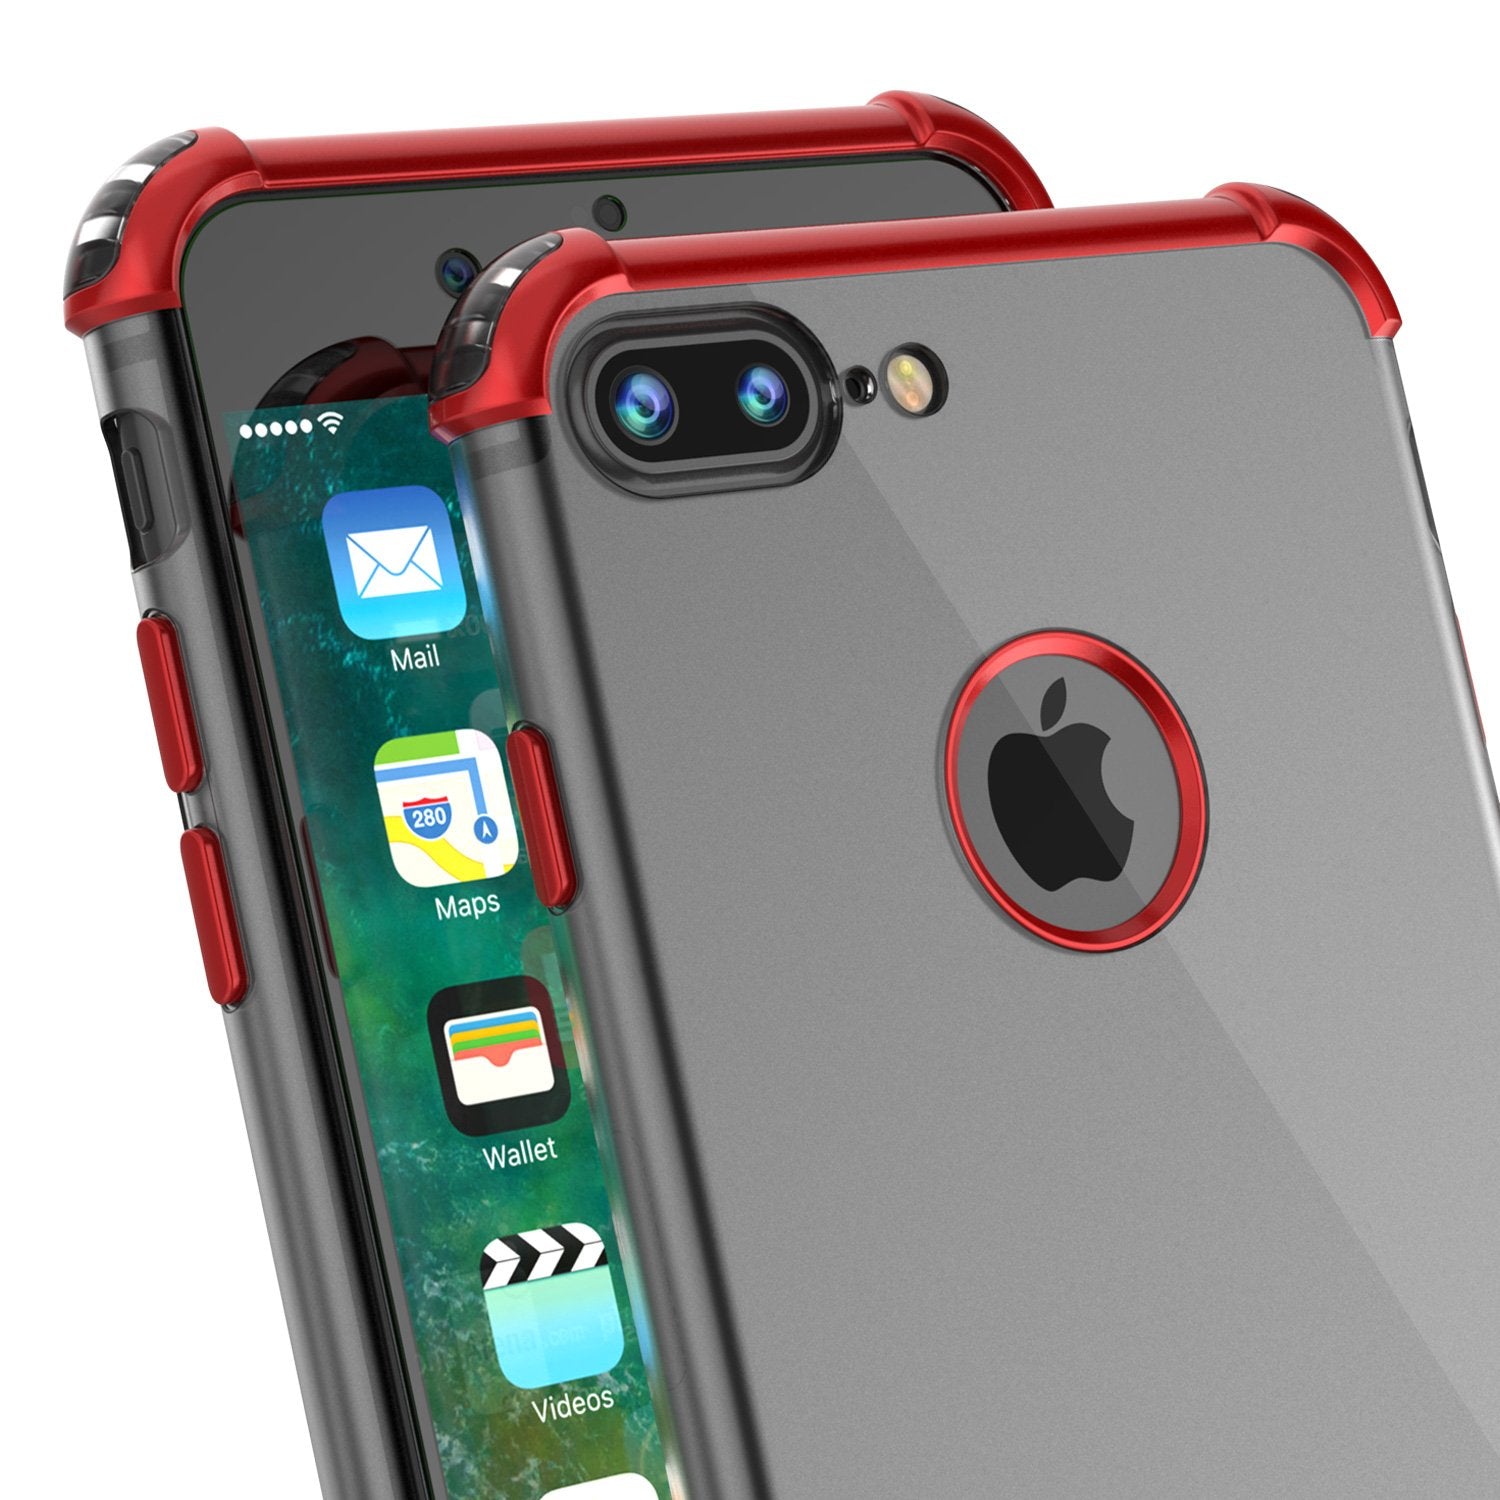 iPhone 7 PLUS Case, Punkcase [BLAZE Red SERIES] Protective Cover W/ PunkShield Screen Protector